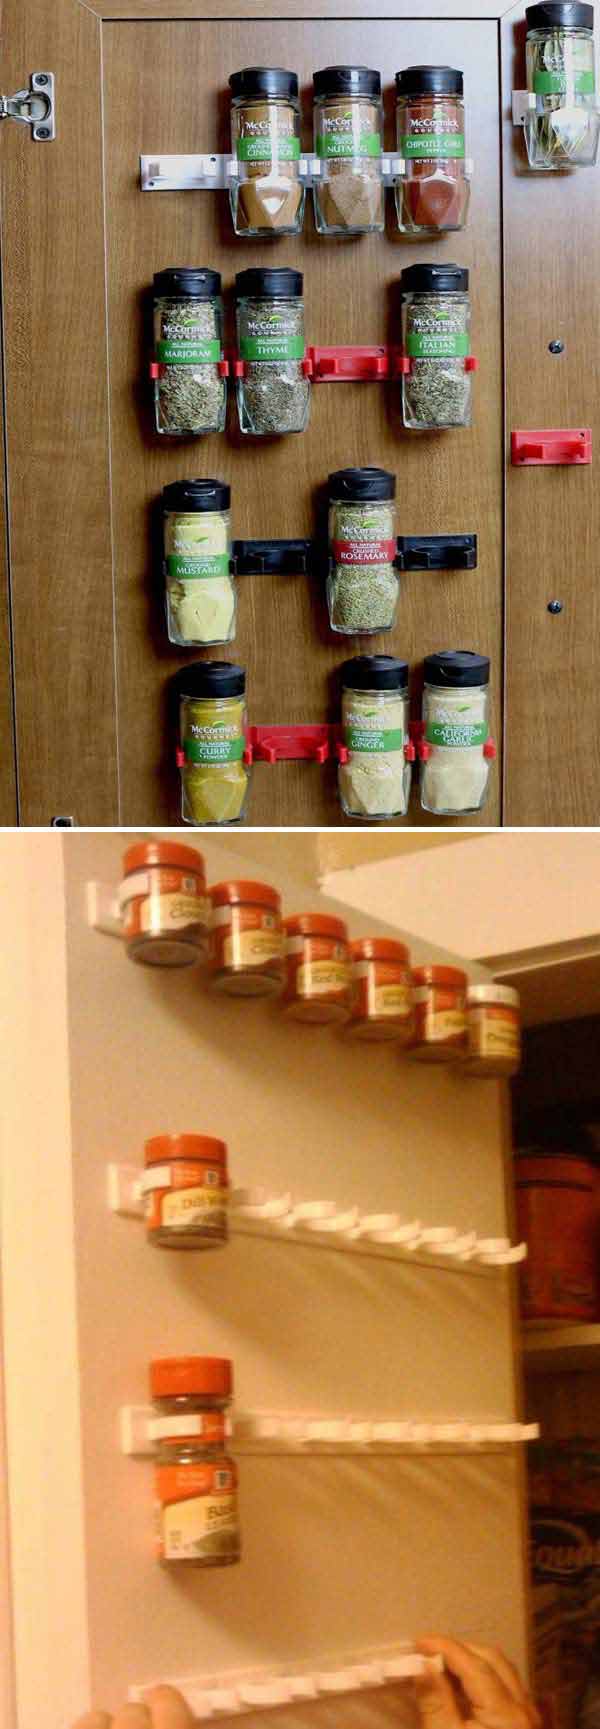 34 Super Epic Small Kitchen Hacks For Your Household homesthetics decor (12)